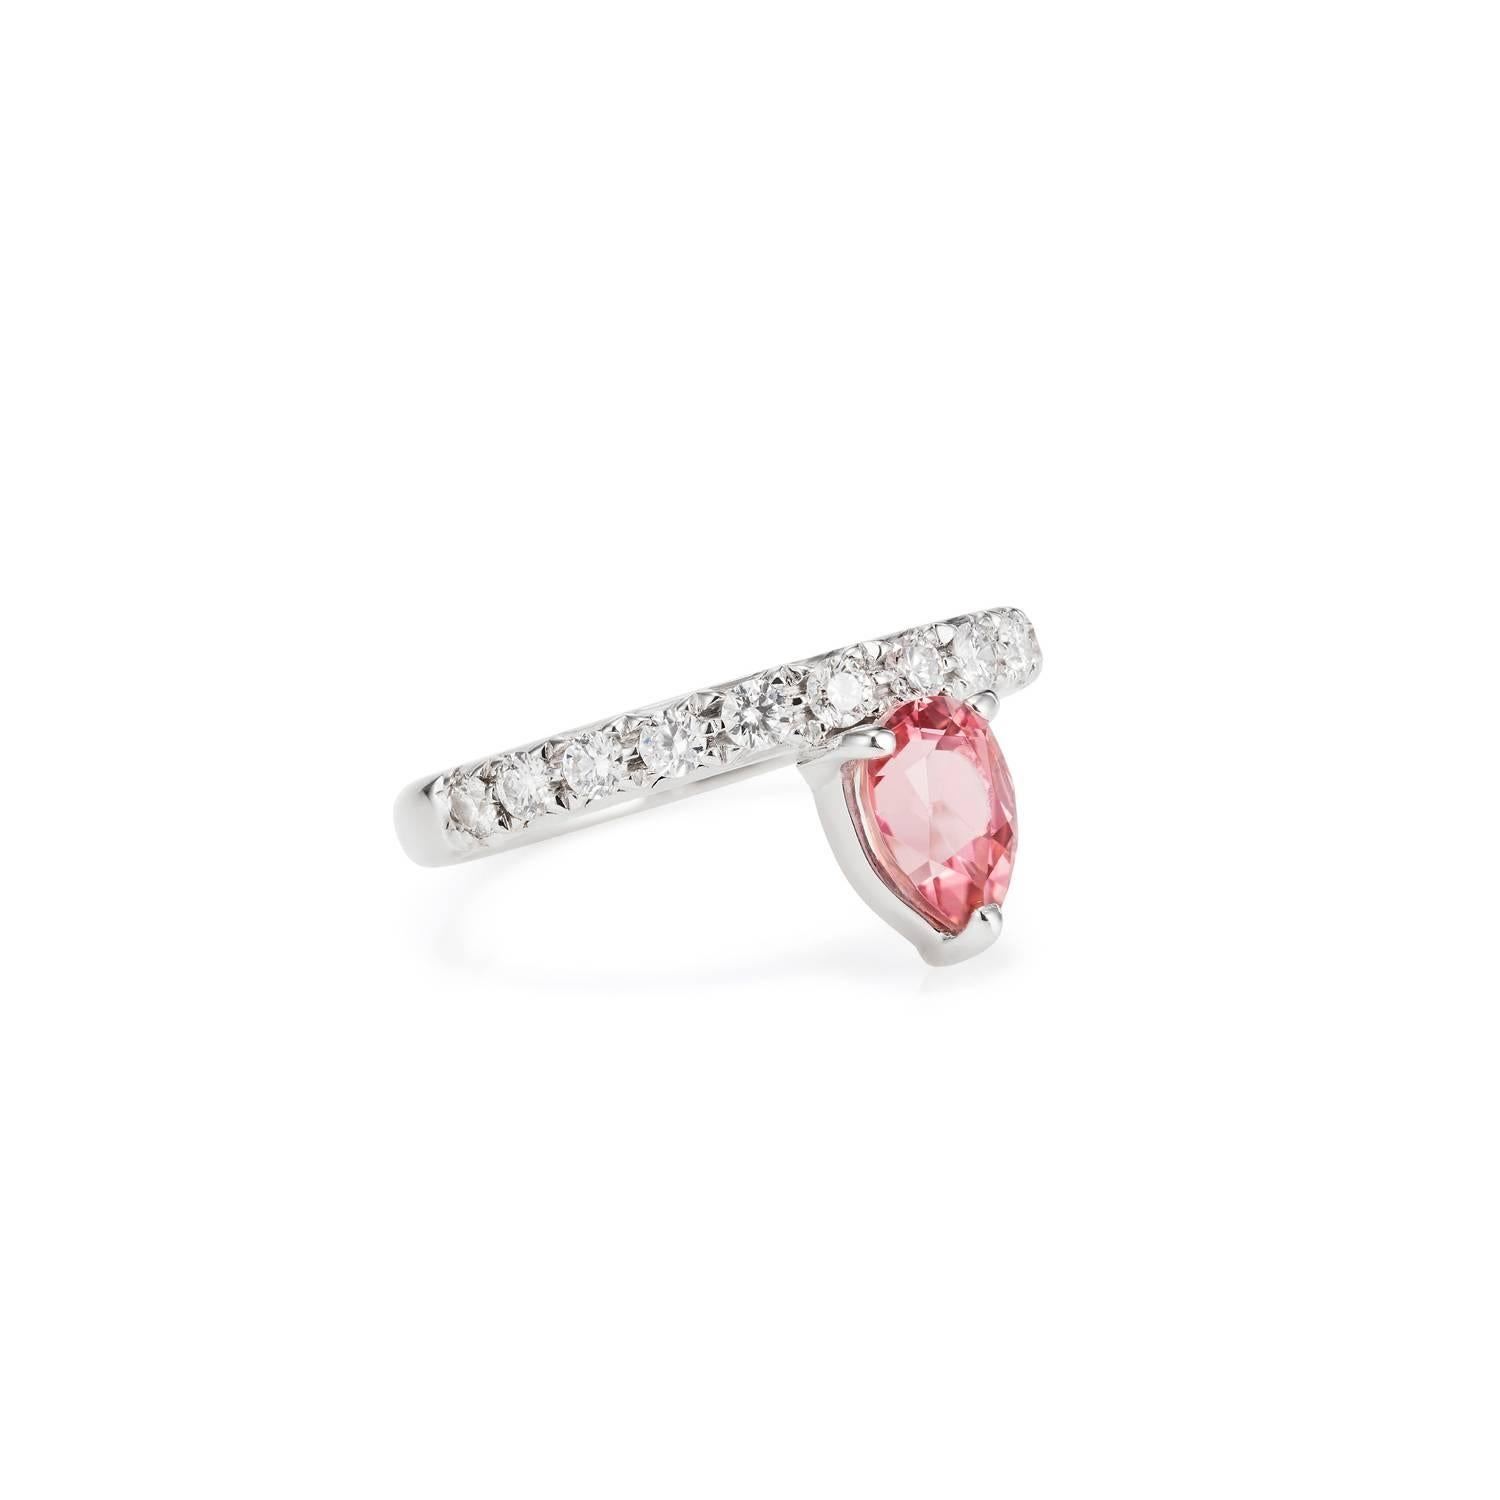 This DUBINI ring from the 'Theodora' collection features an rubellite tourmaline drop with diamonds set in 18K white gold. 

…………………………………………………………………………………………………………………………………………………………………….

Inspired by Empress Theodora, wife of Justinian I, she was